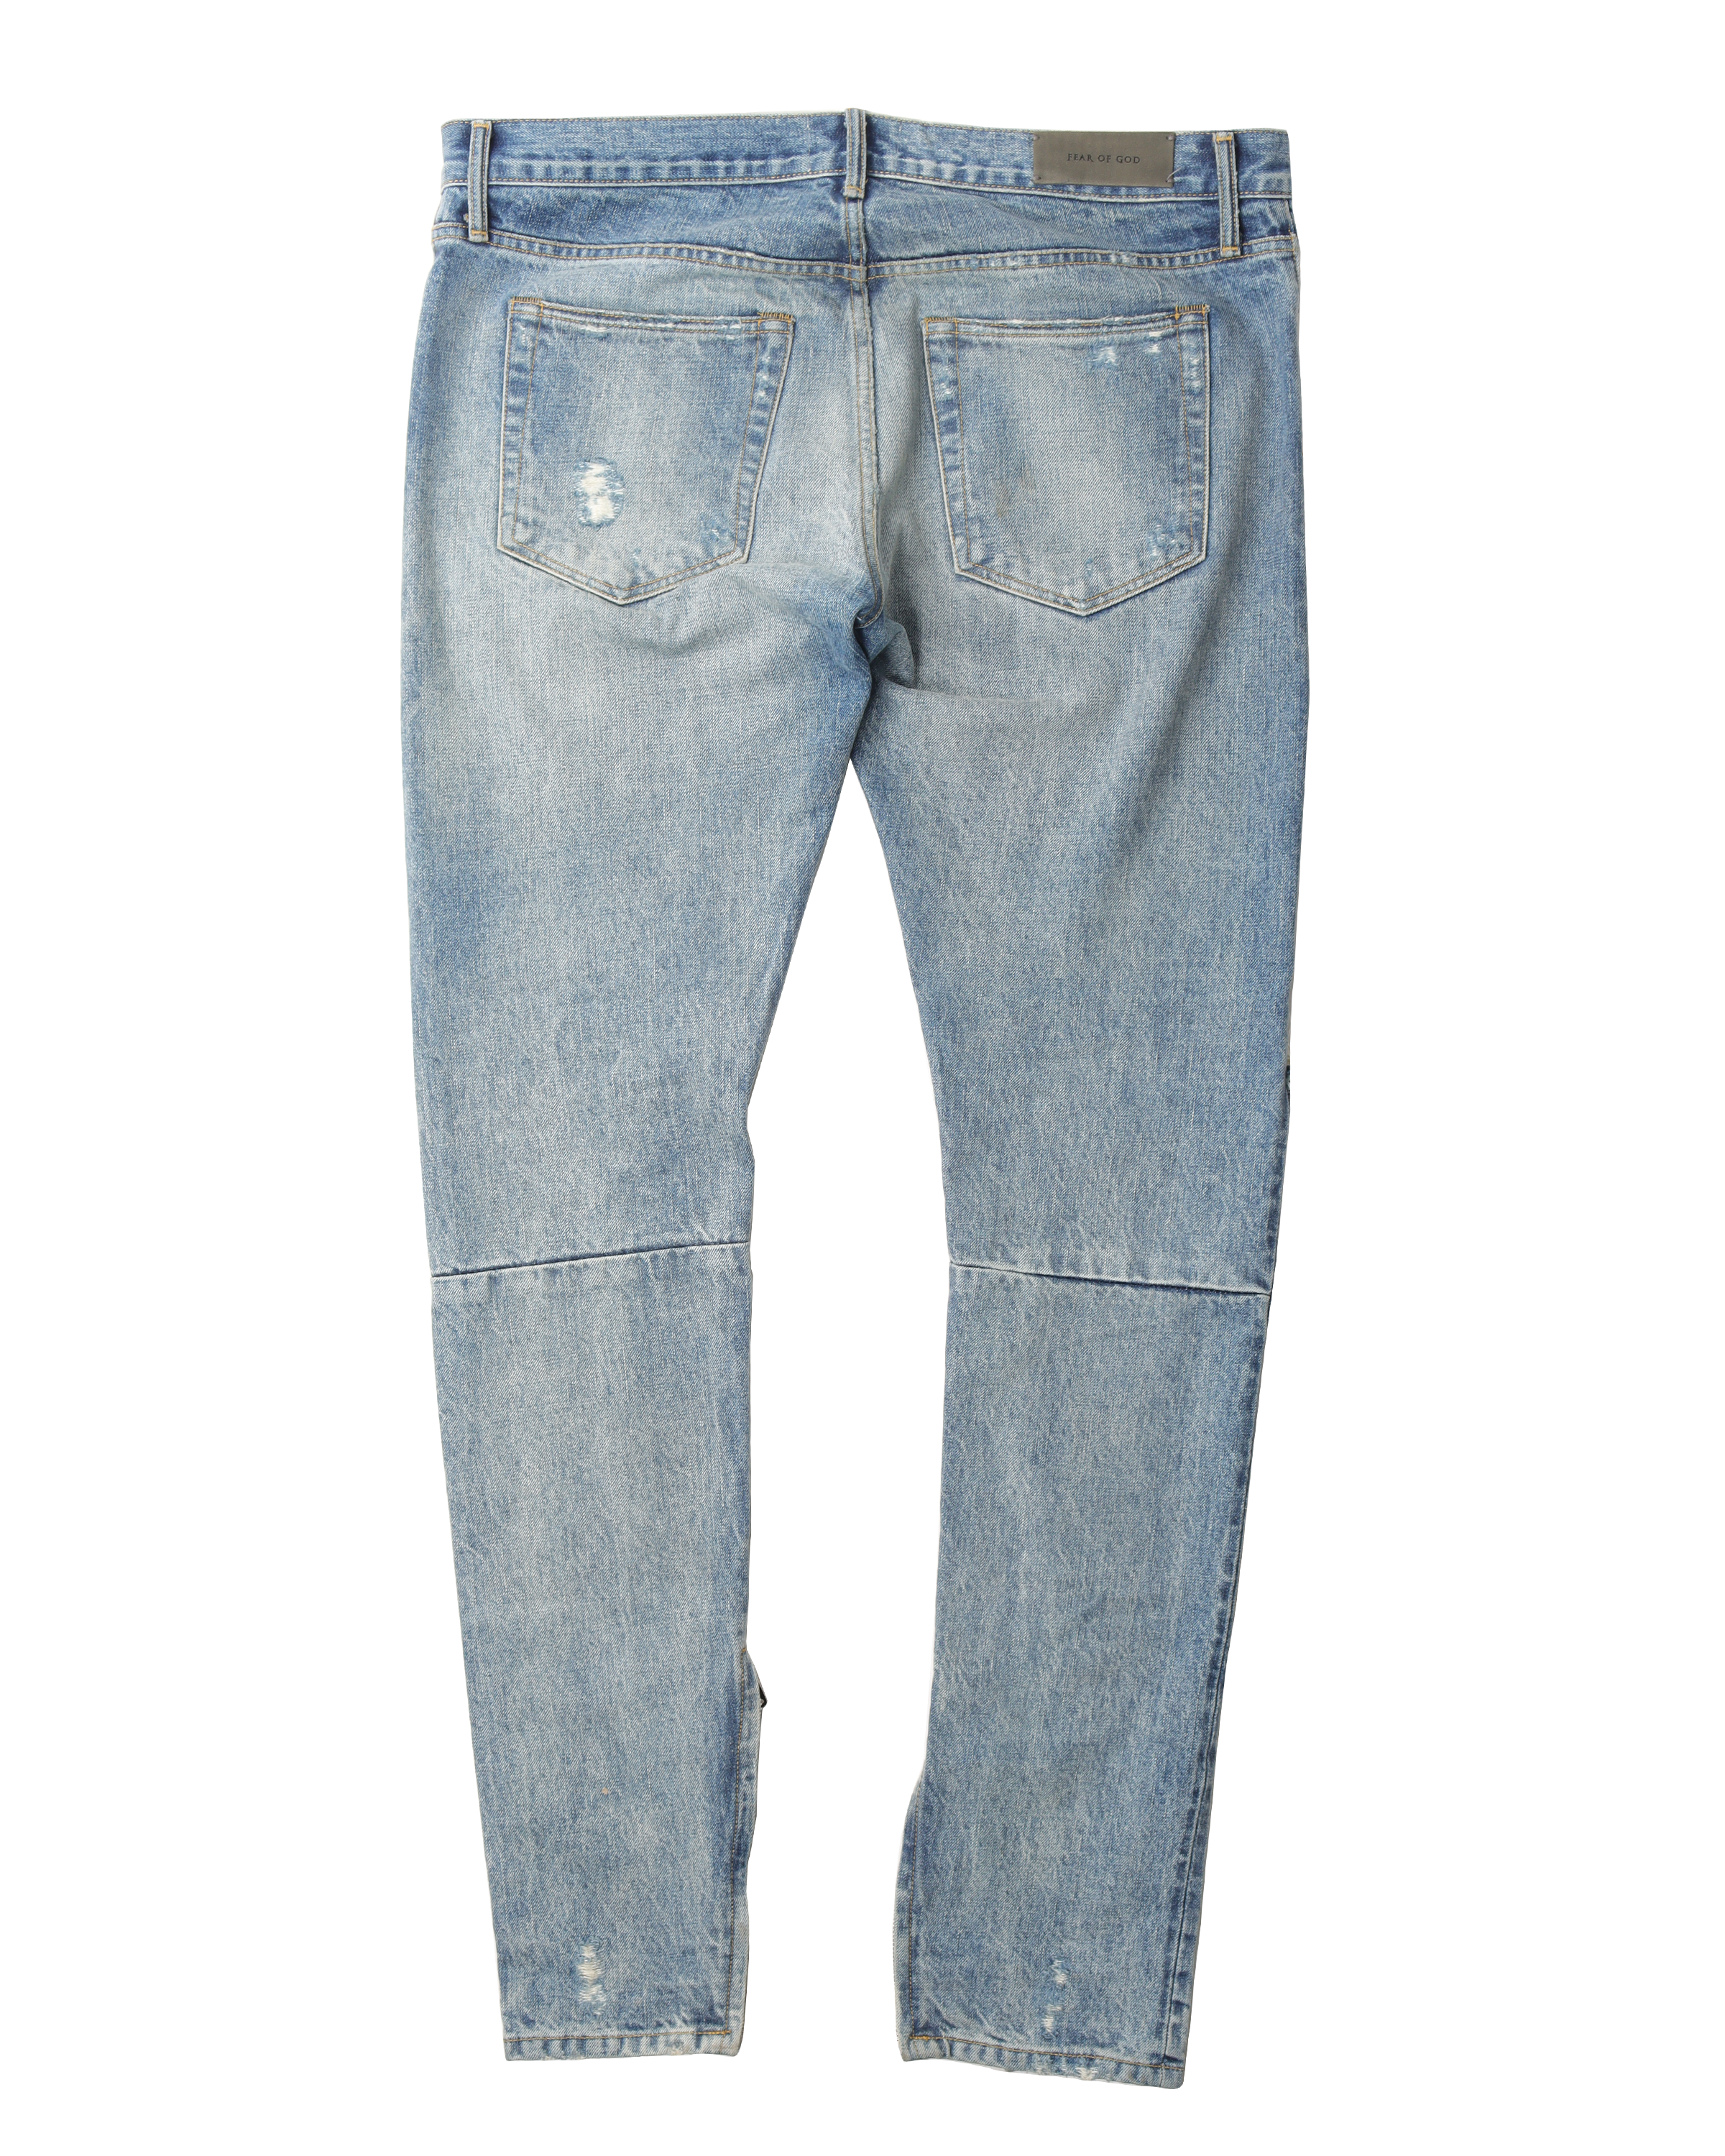 Fourth Collection Distressed Denim